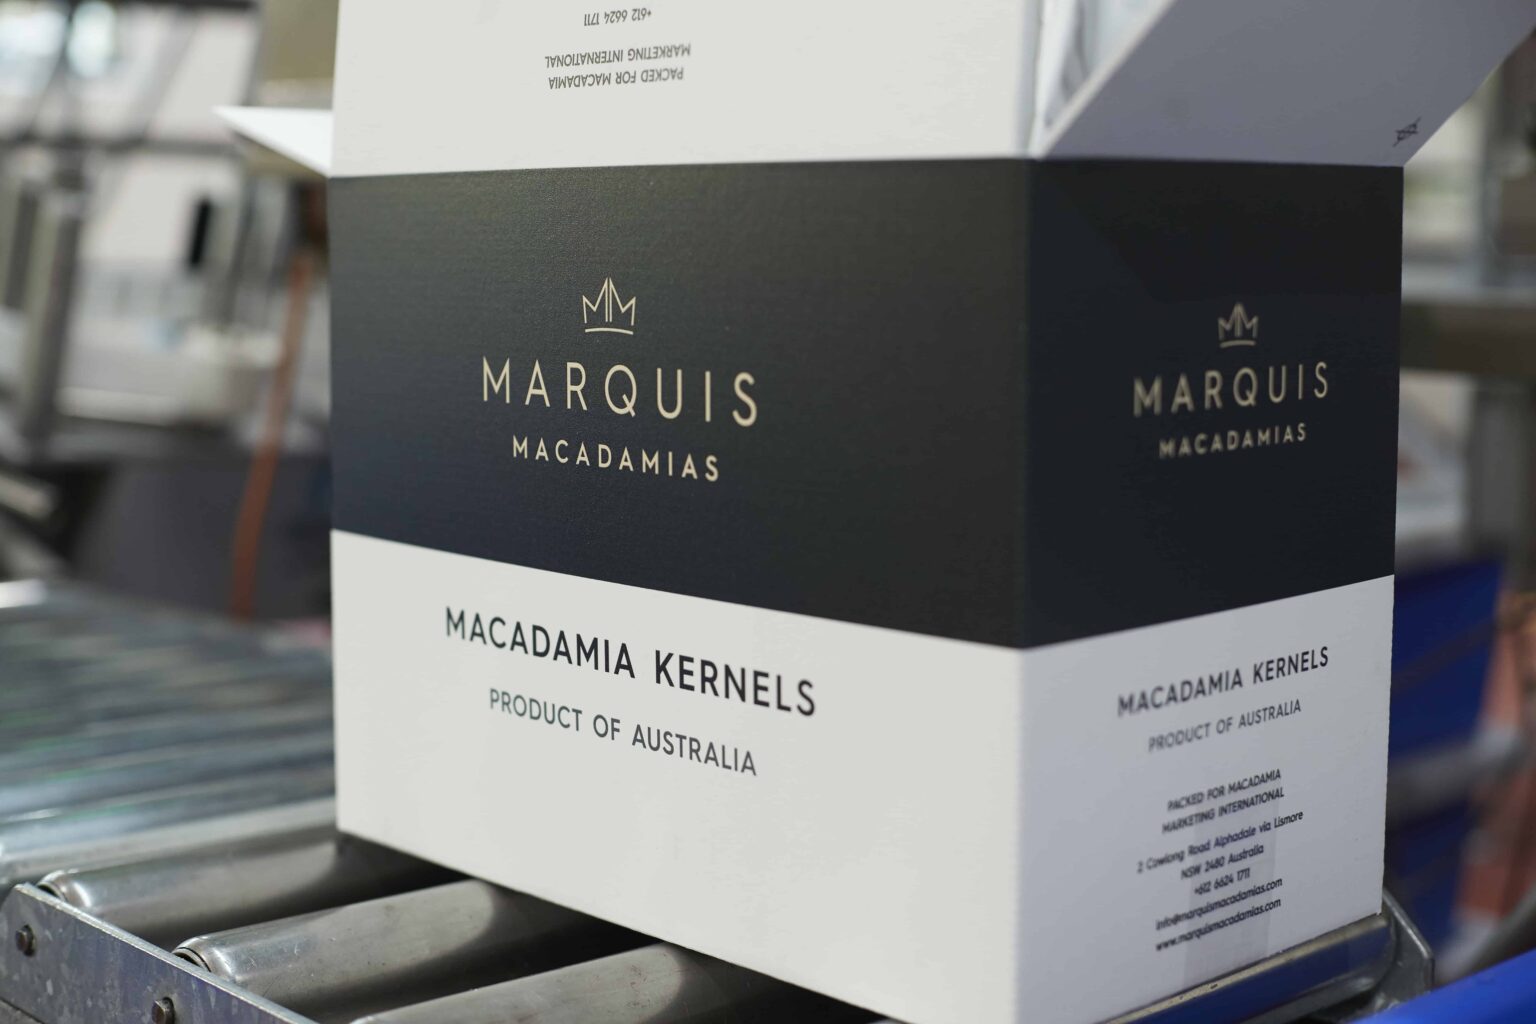 Box of macadamia nuts with Marquis branding